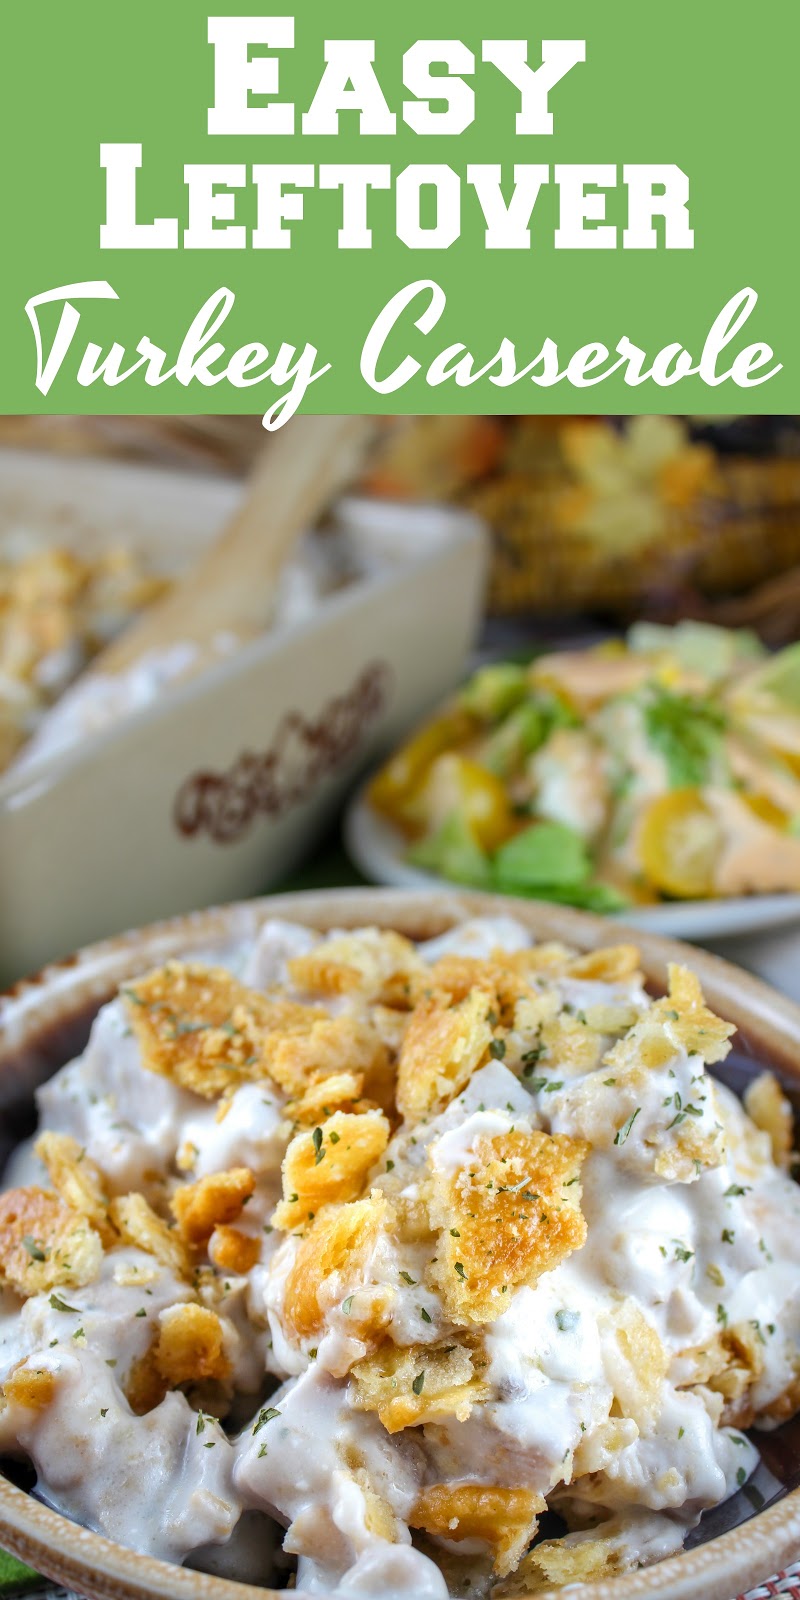 Easy Leftover Turkey Casserole - The Food Hussy